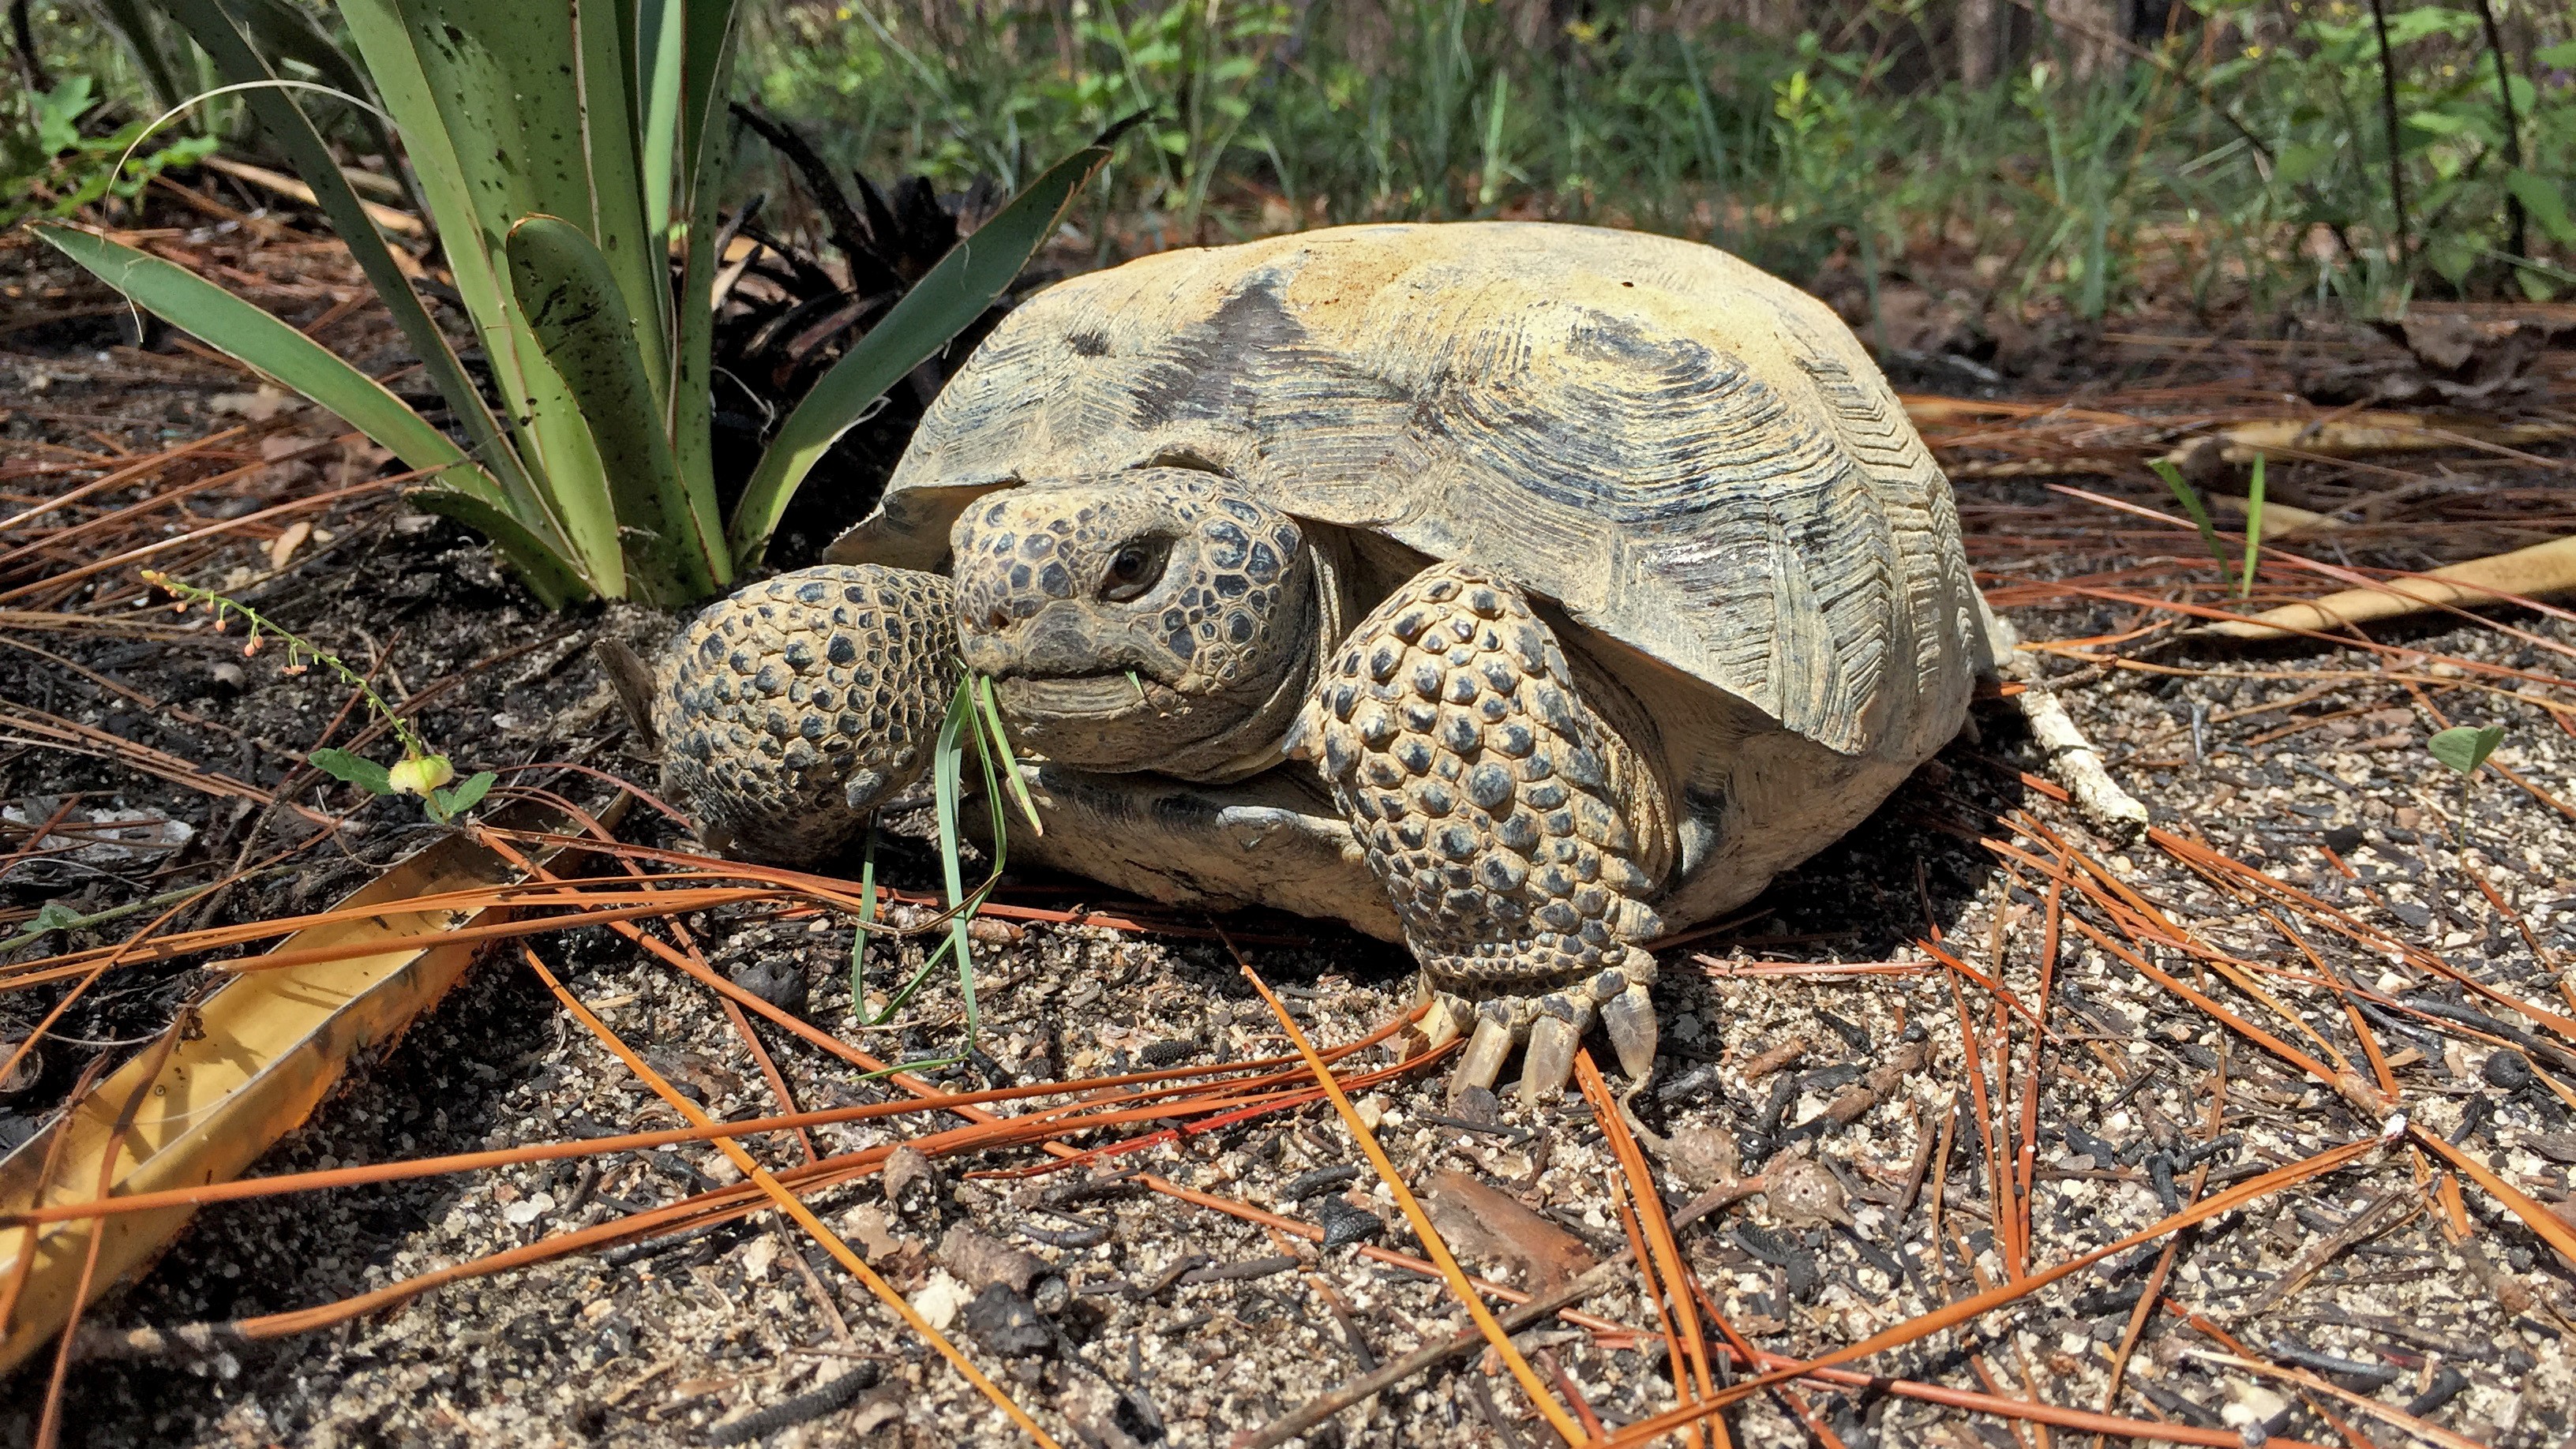 Picture of a Gopher tortoise eating